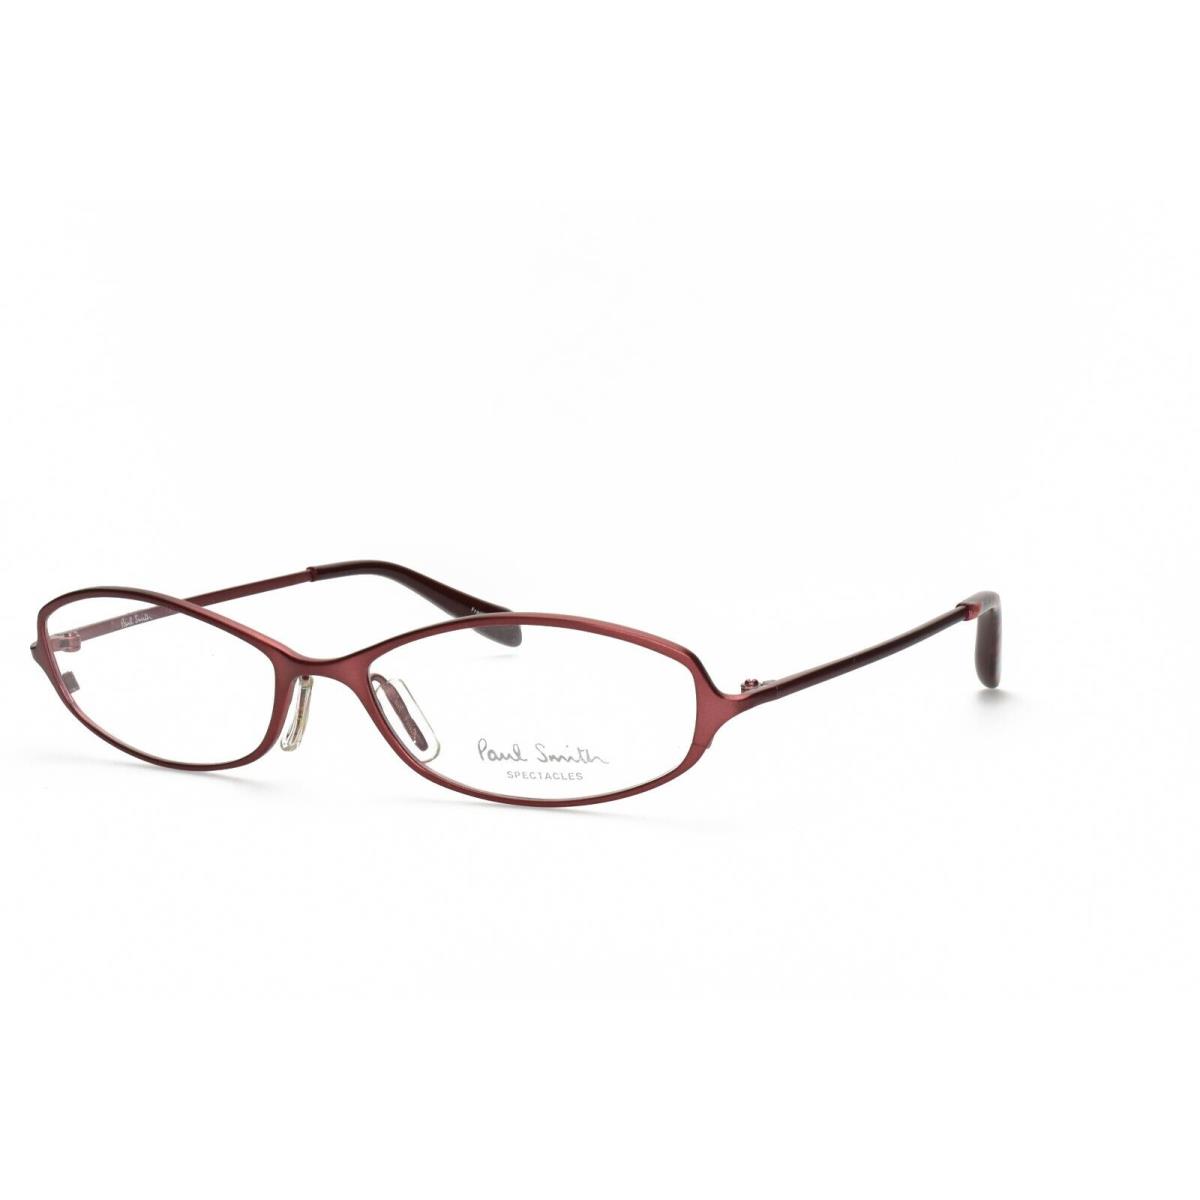 Paul Smith PS 199 Rou Eyeglasses Frames Only 51-16-130